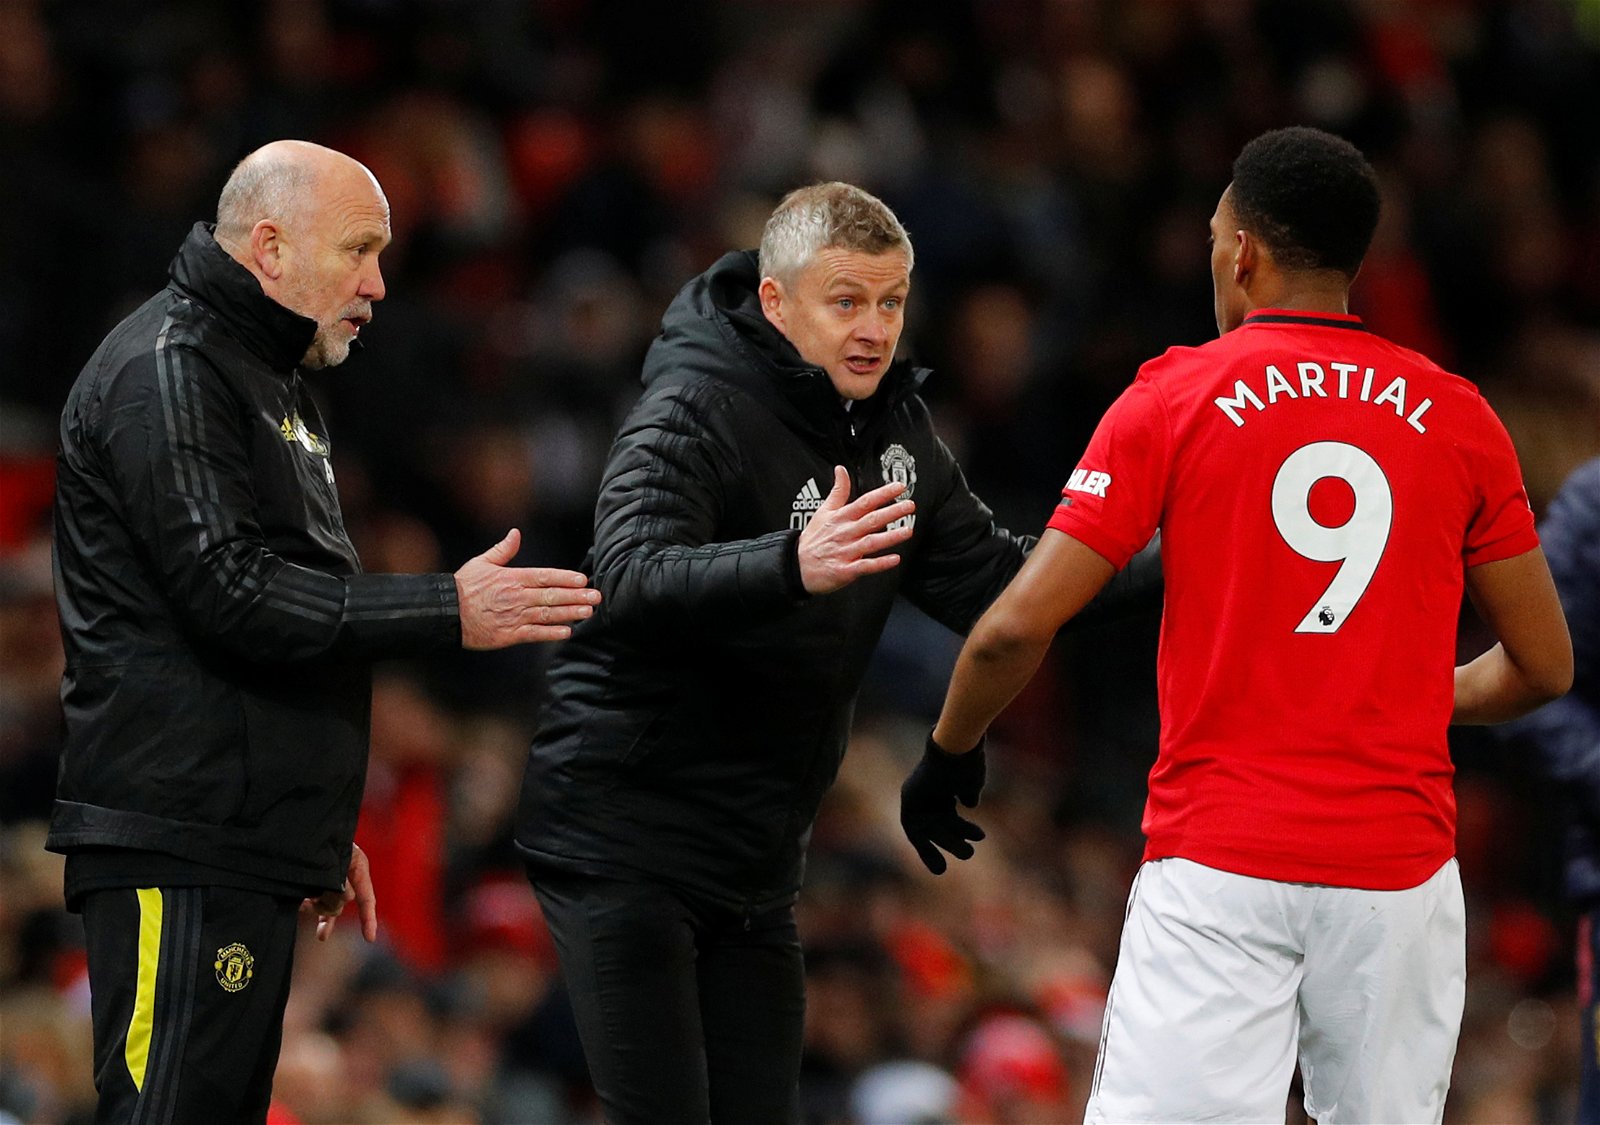 Solskjaer informs Manchester United players of possible sacking